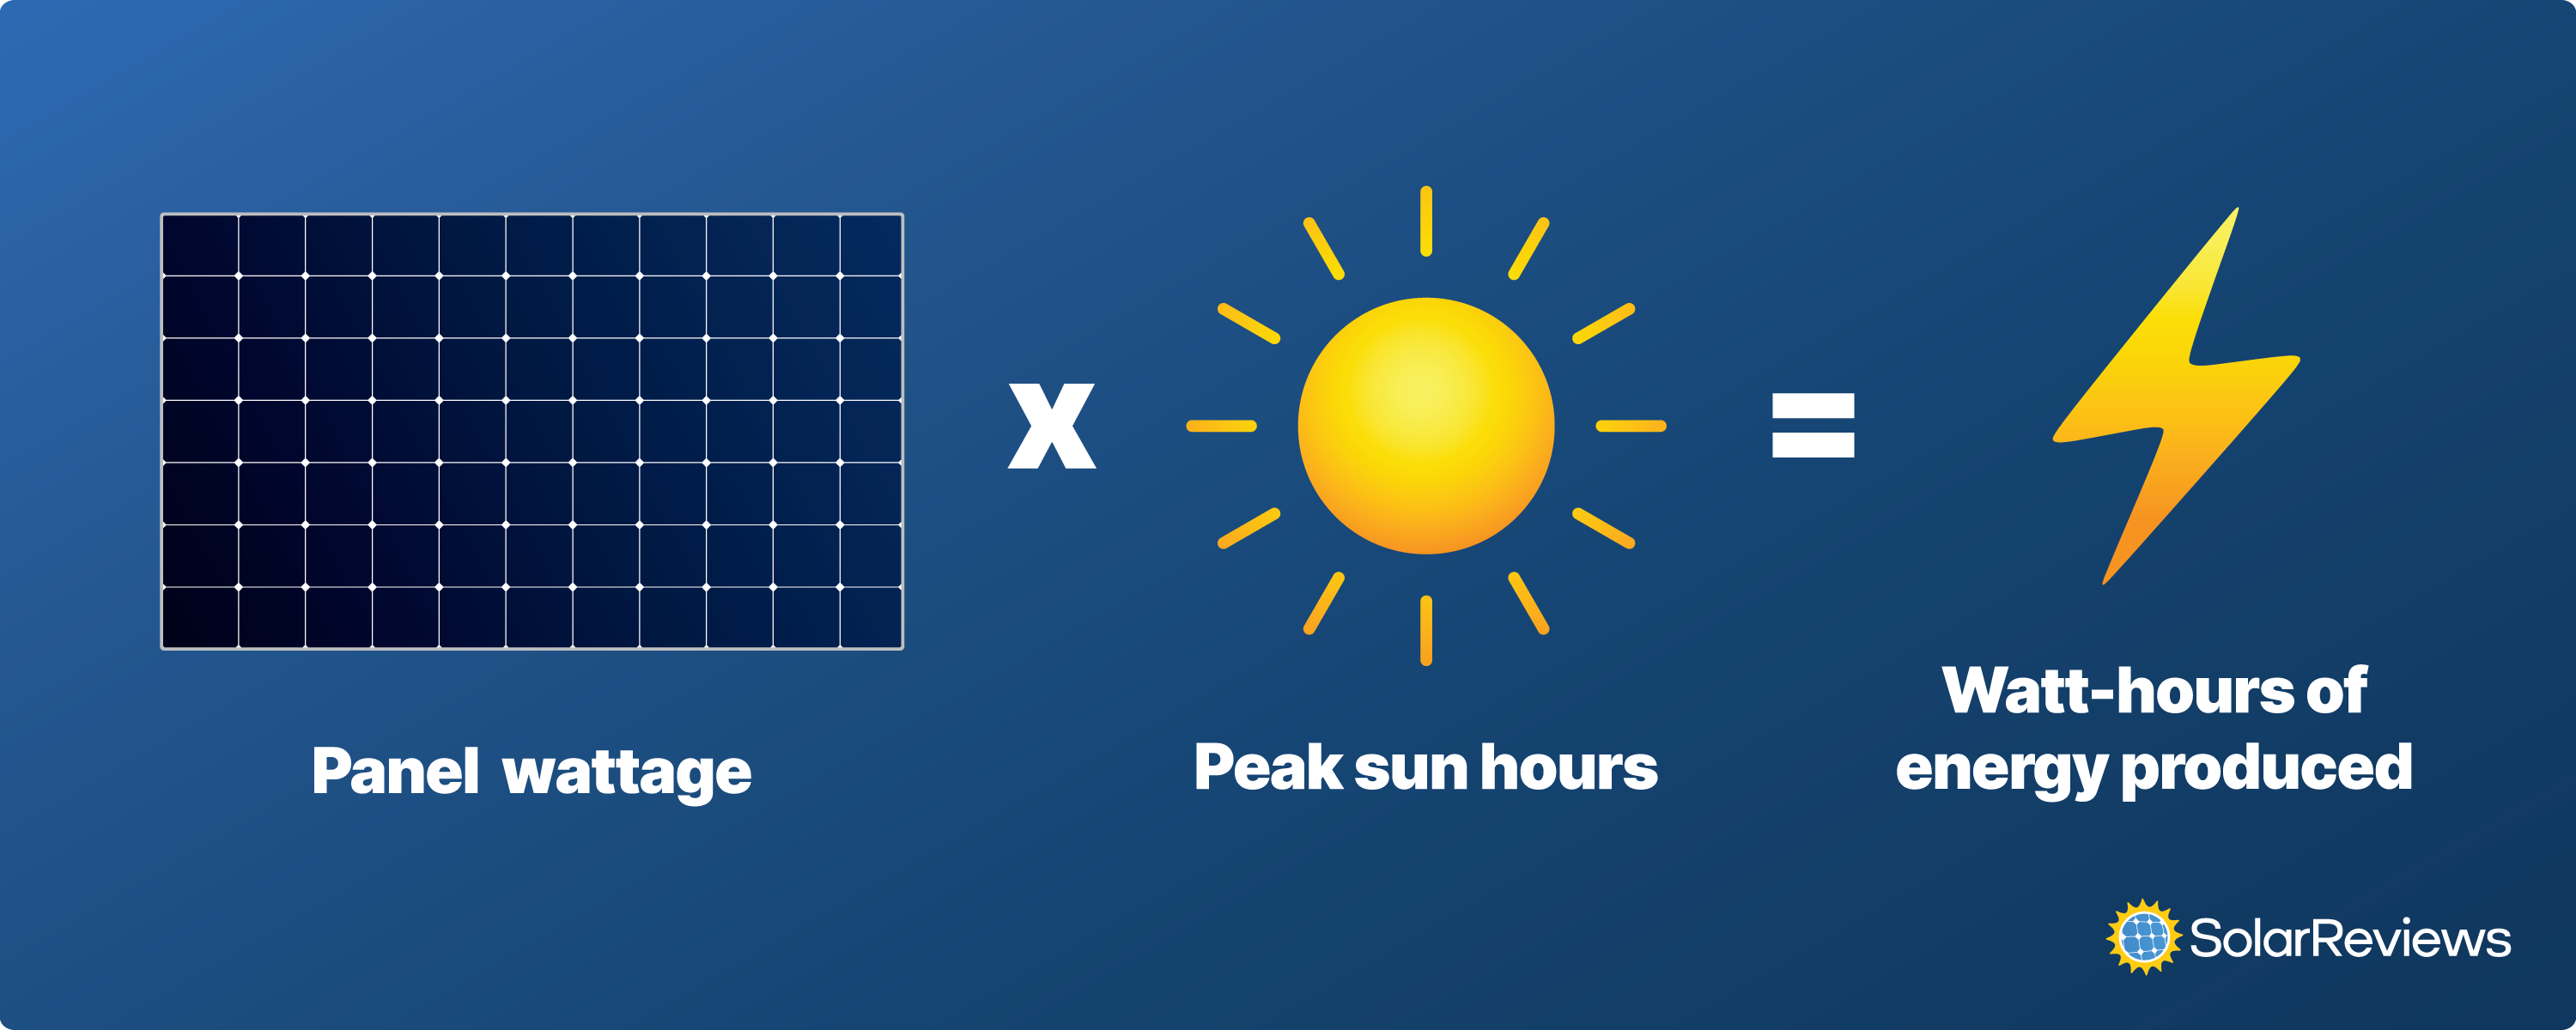 A graphic of the equation to solve how much electricity a solar panel can produce. Multiply the panel's wattage by the peak sun hours to determine the watt-hours of energy produced.